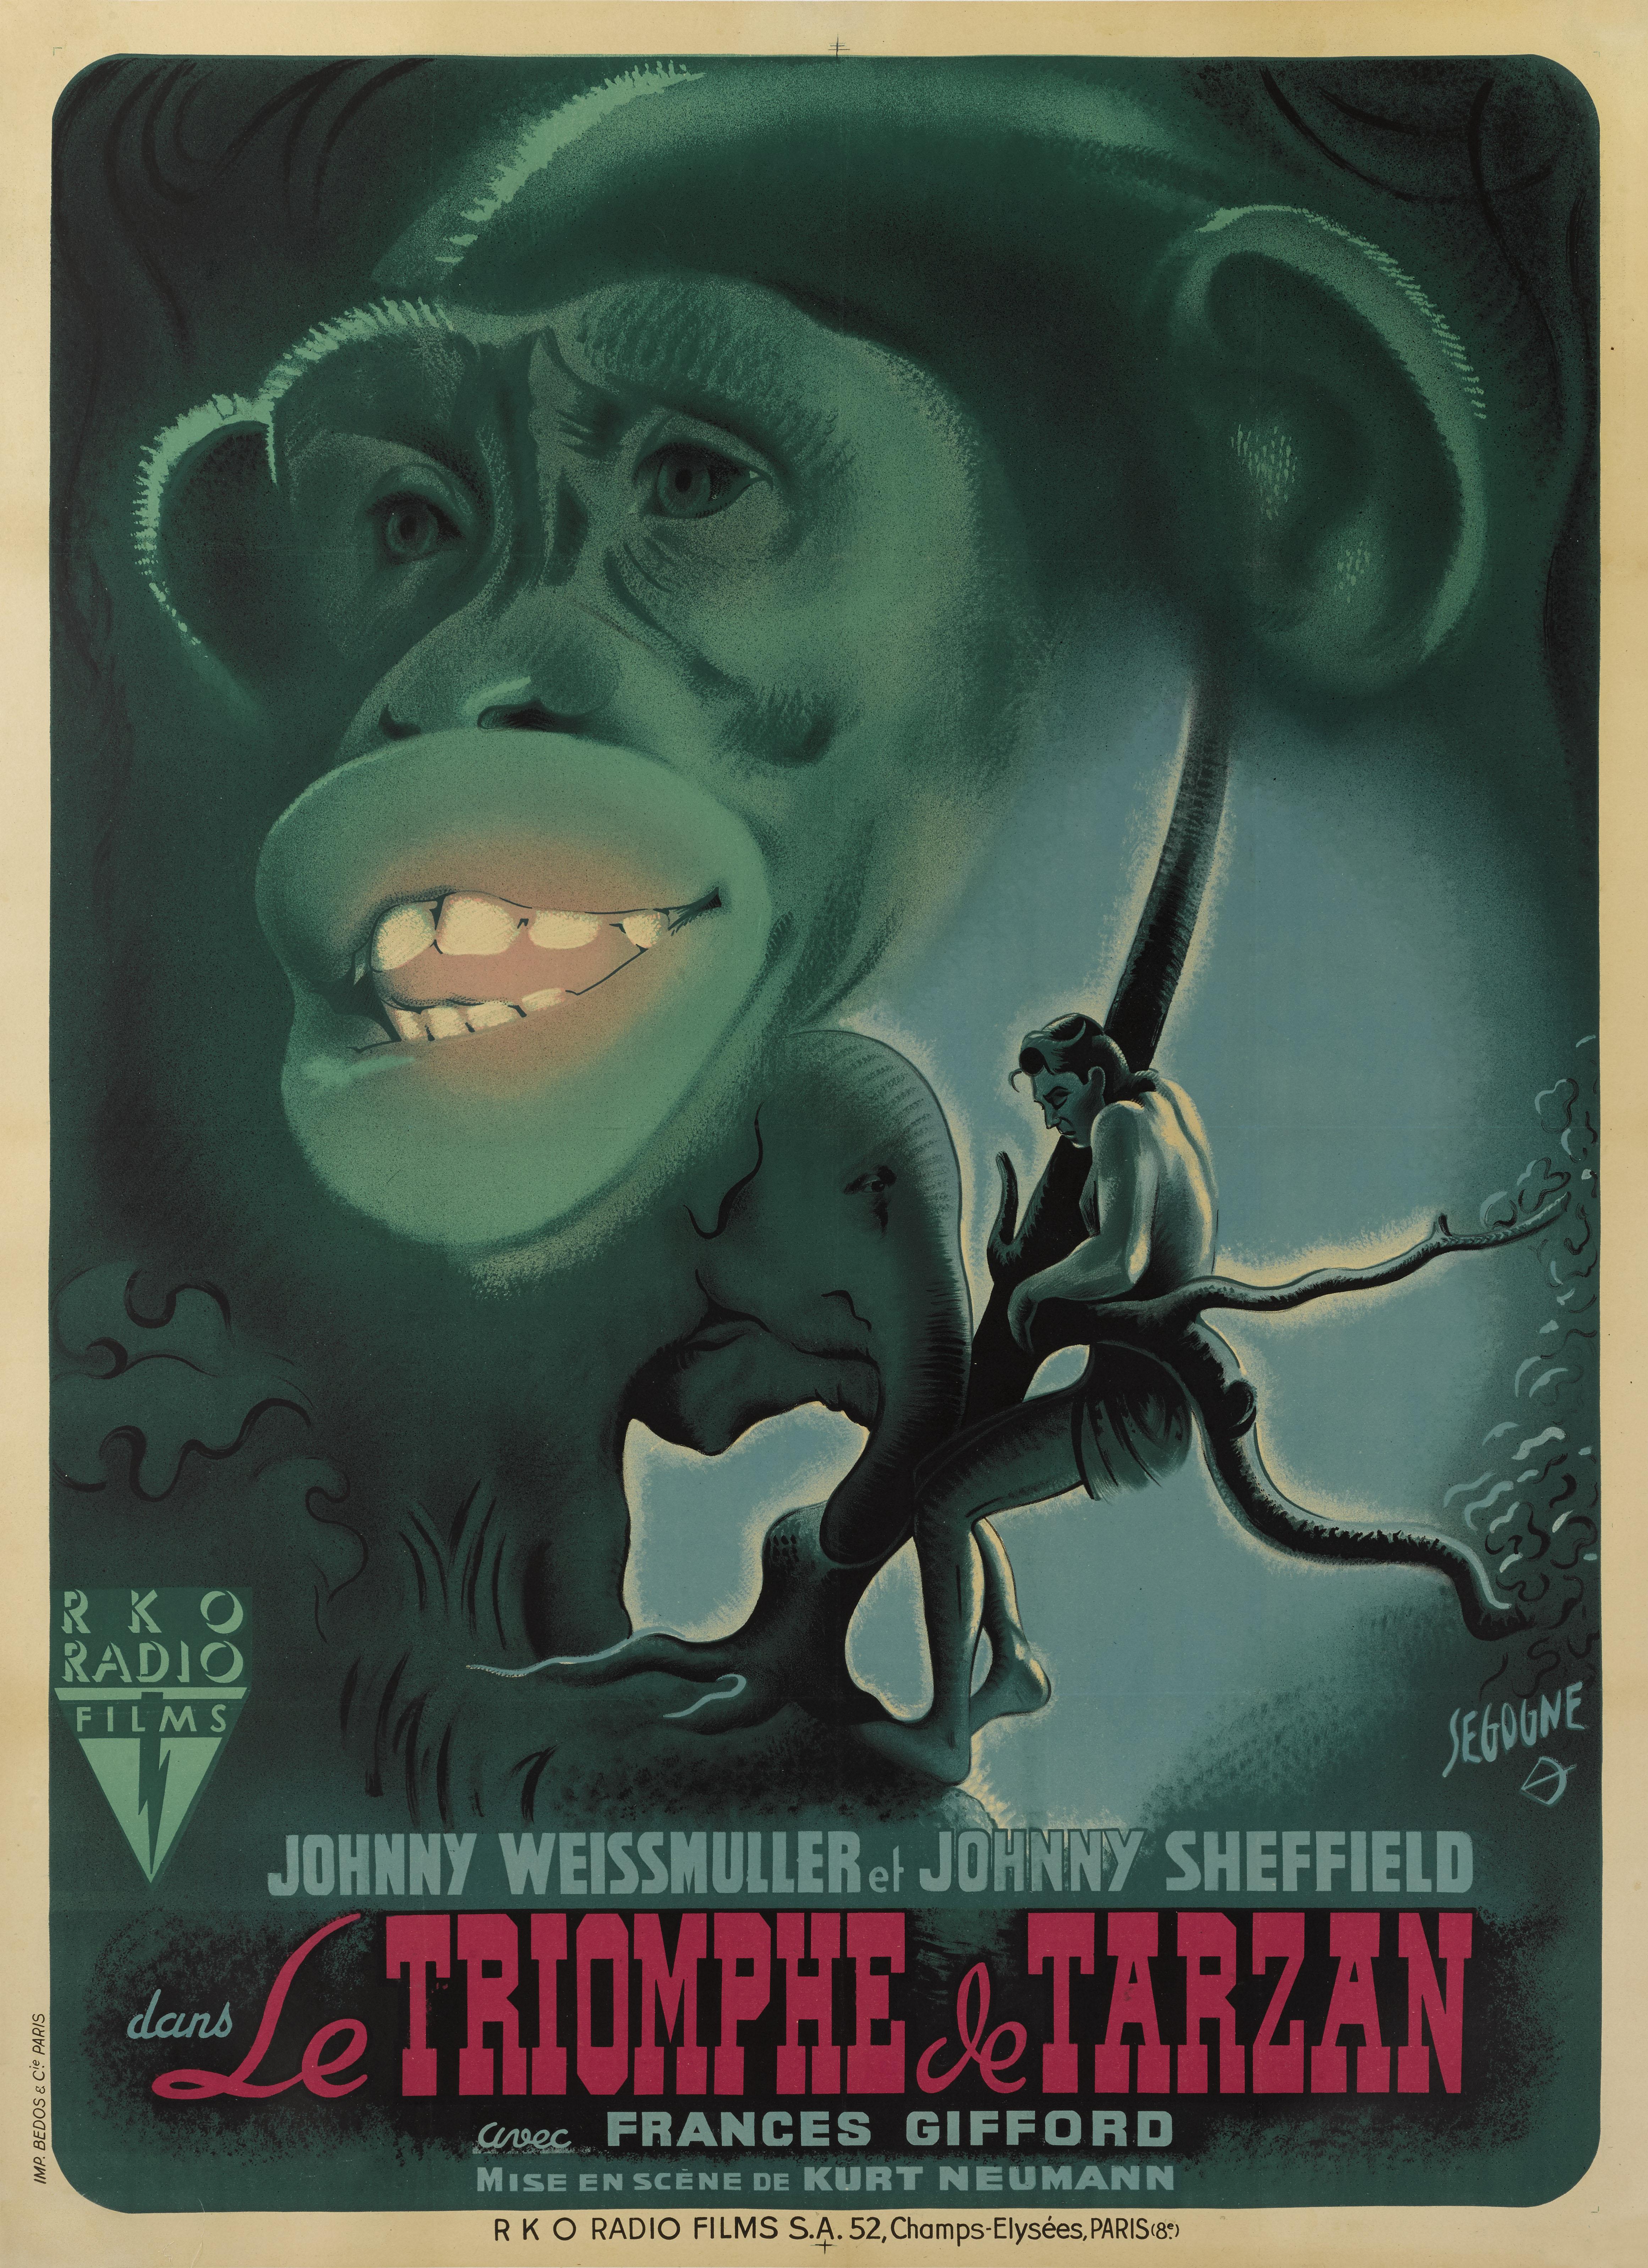 Original French film poster for the 1943 film Tarzan Triumphs.
This adventure film was directed by Wilhelm Thiele, and was based on the characters created by Edgar Rice Burroughs. Johnny Weissmuller plays Tarzan, as he fights the Nazis paratroopers